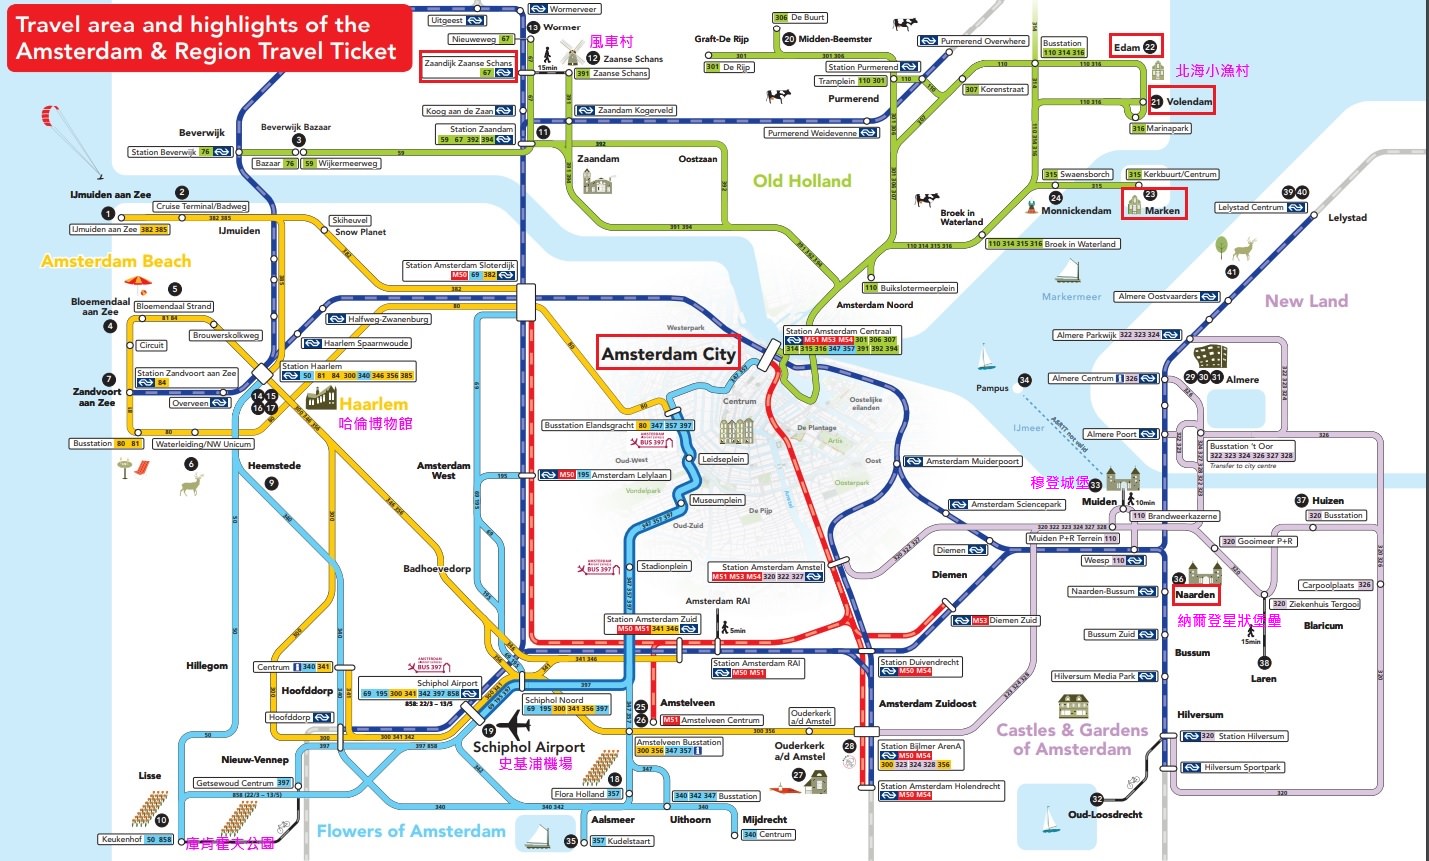 amsterdam and region travel ticket map